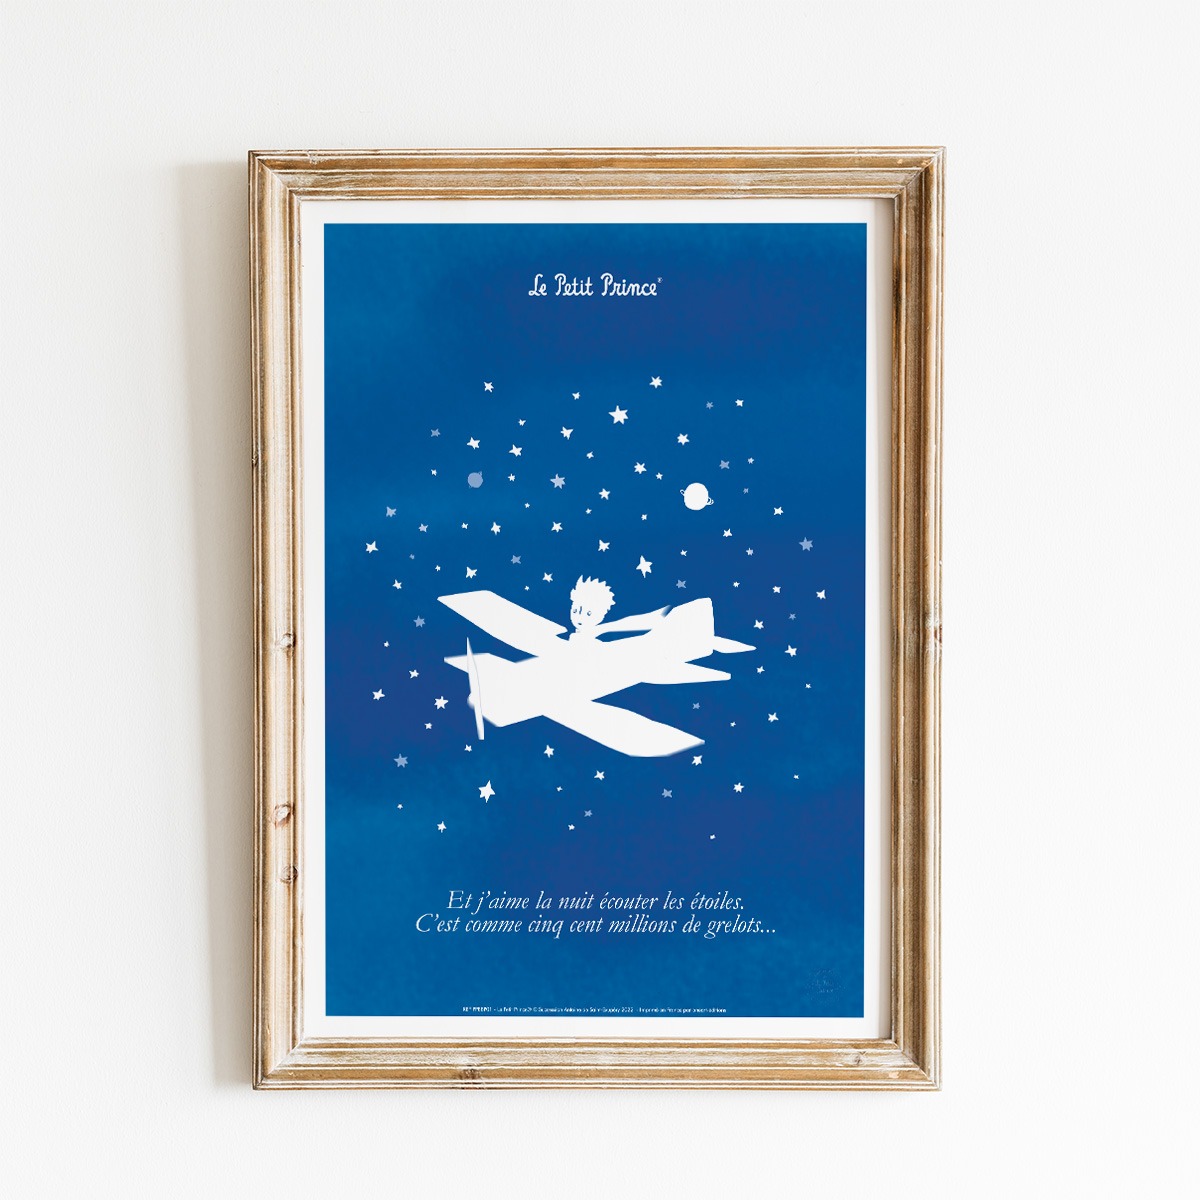 New Little Prince posters by OneArt are available!